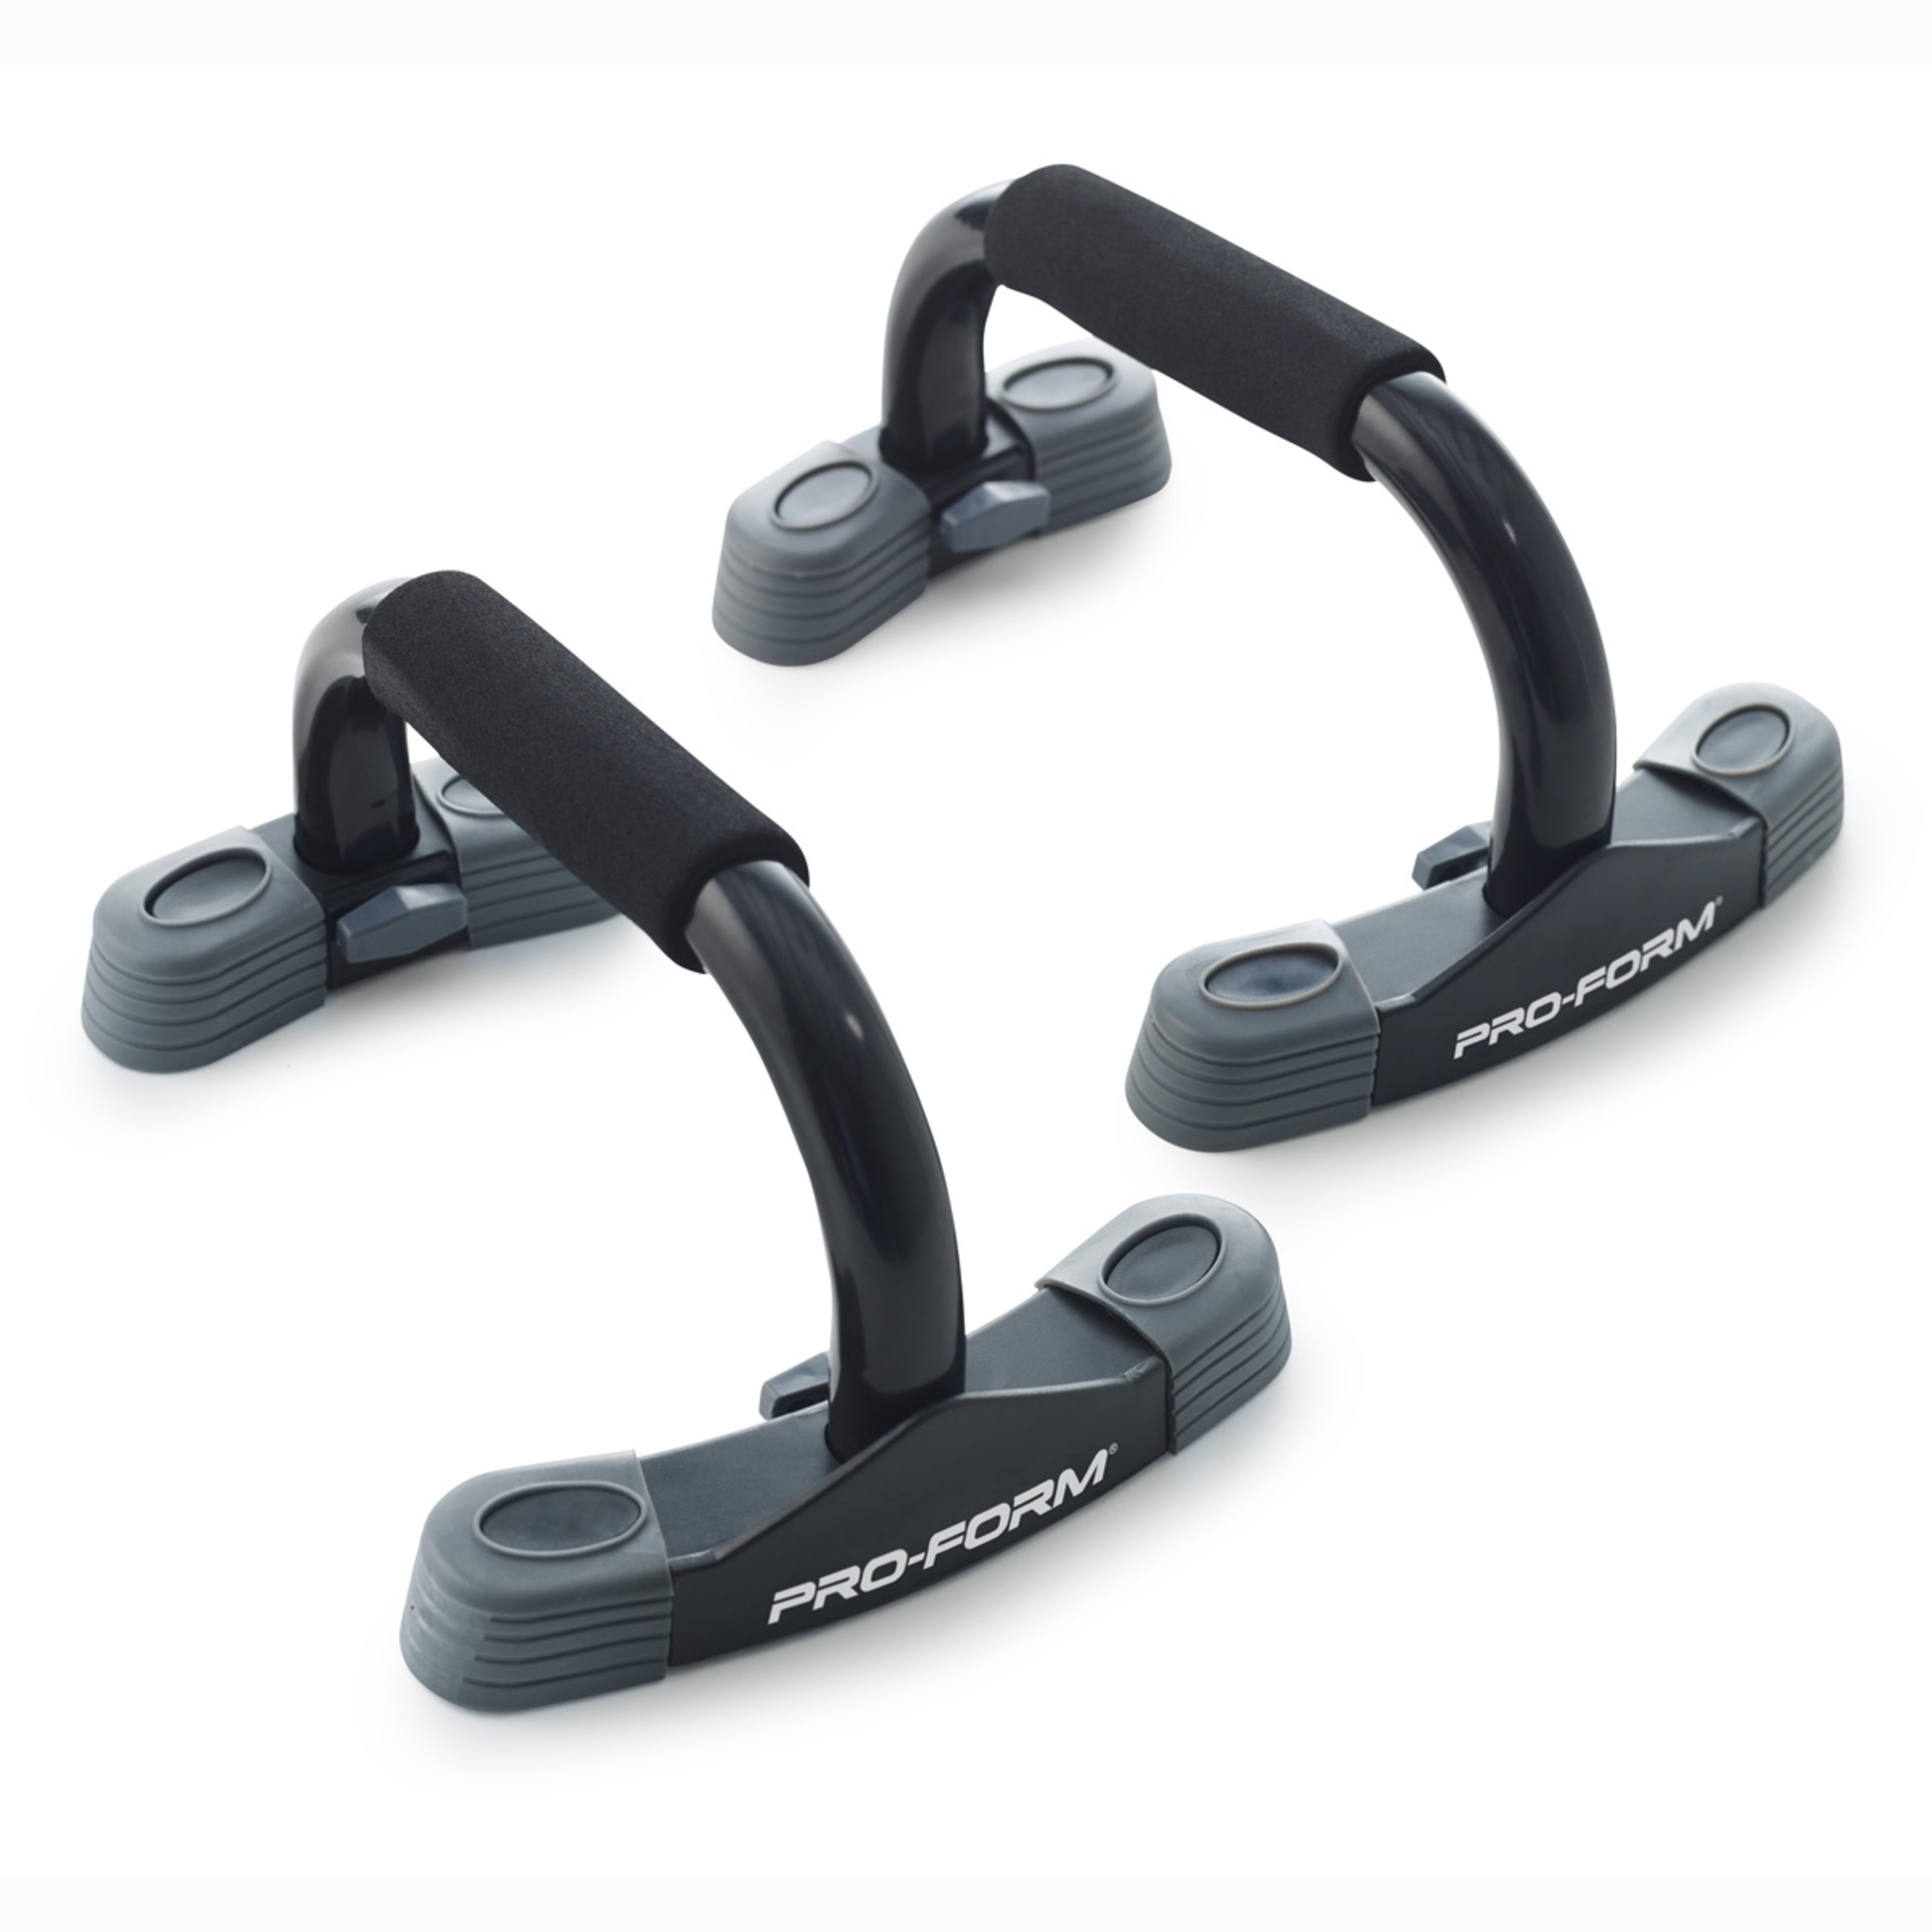 Contoured Push-up Stands